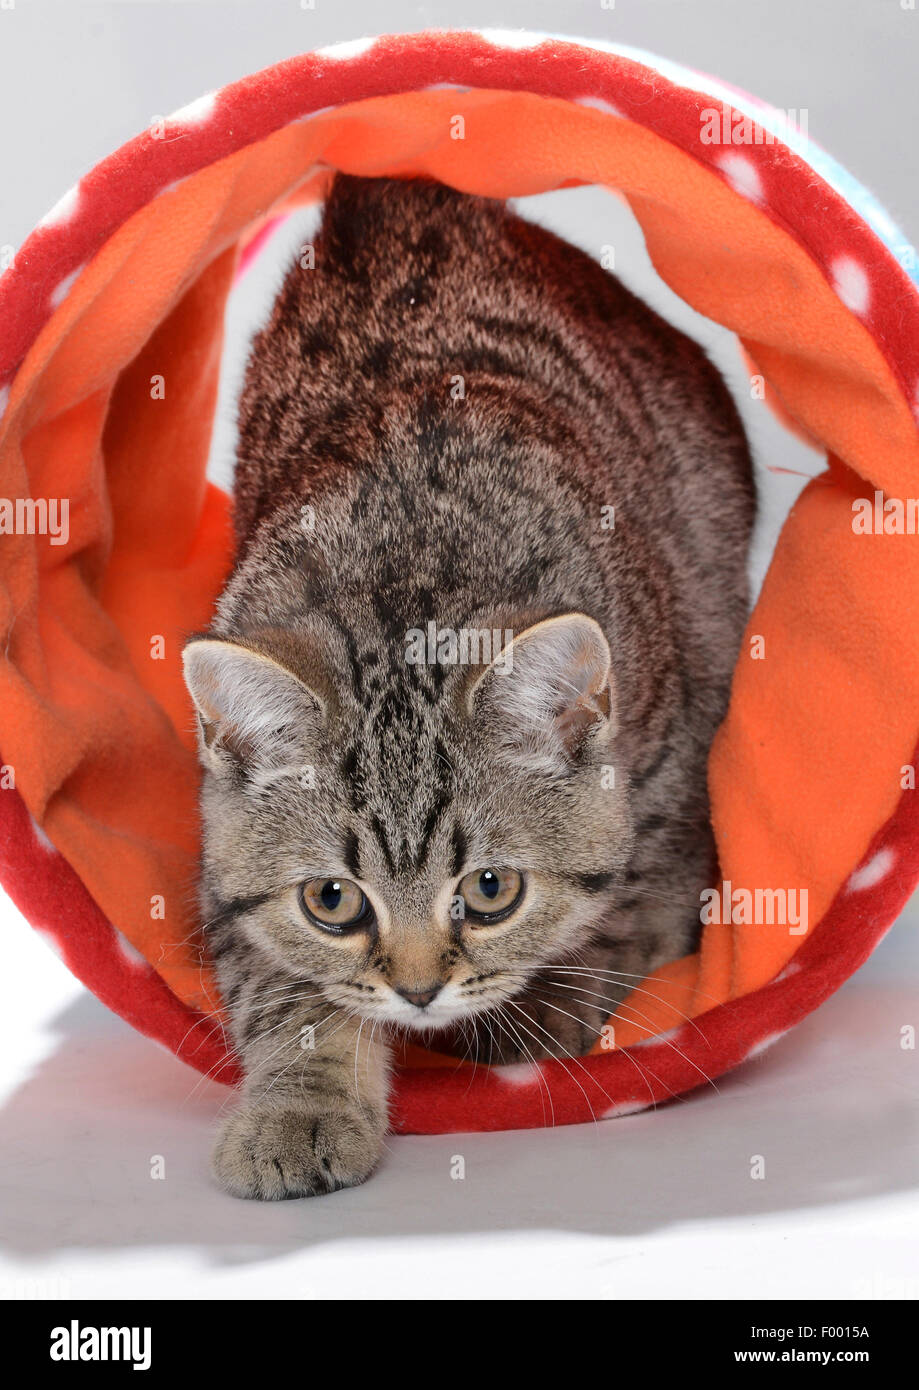 British Shorthair (Felis silvestris f. catus), striped kitten sneaking out of a play tunnel Stock Photo